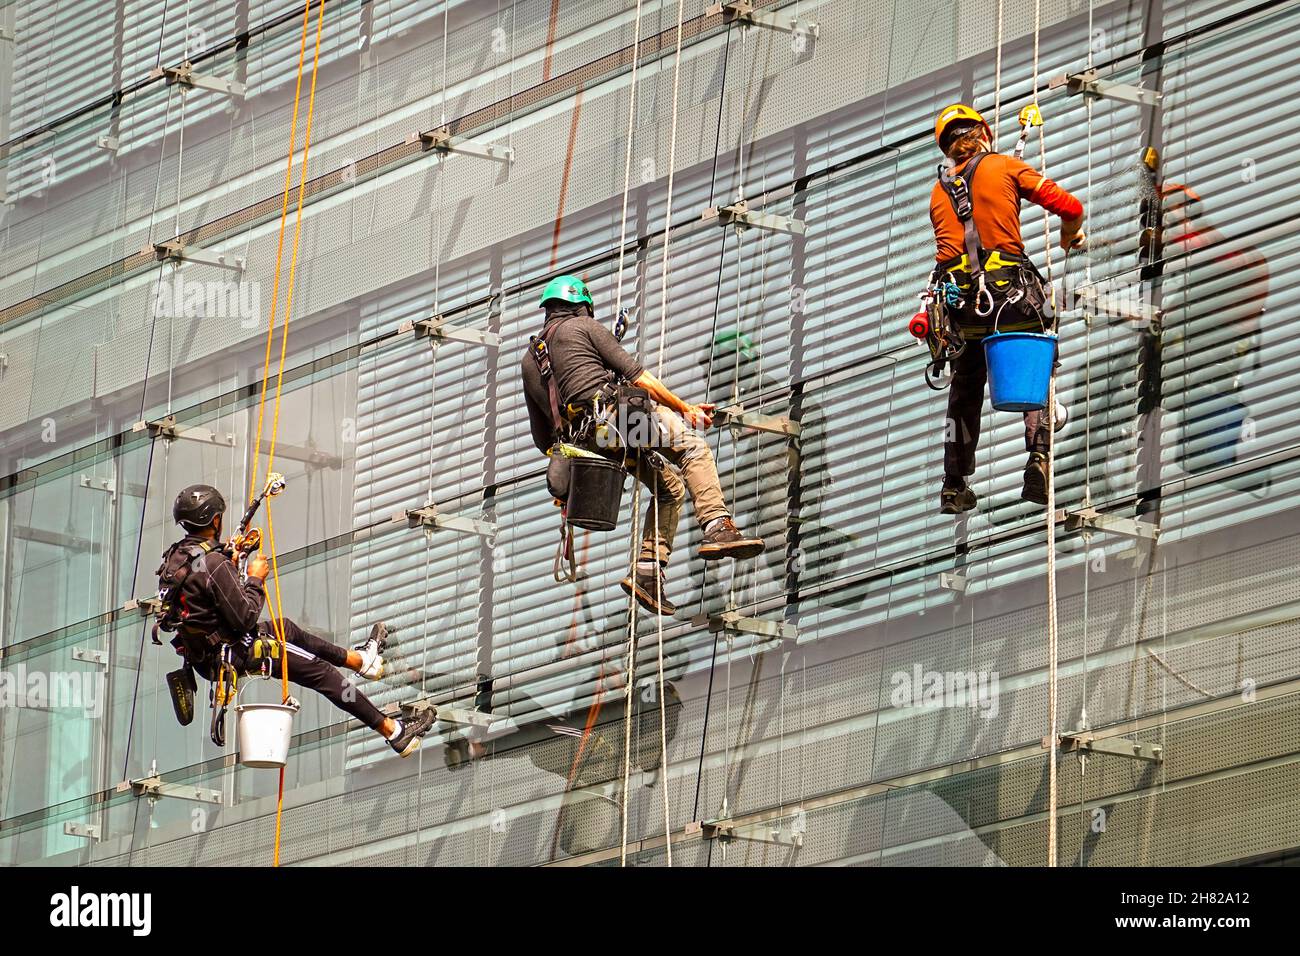 Luxembourg City, Luxembourg, September 2, 2020: Professional building  cleaners equipped with climbing gear cleaning windows on the outside of a moder Stock Photo